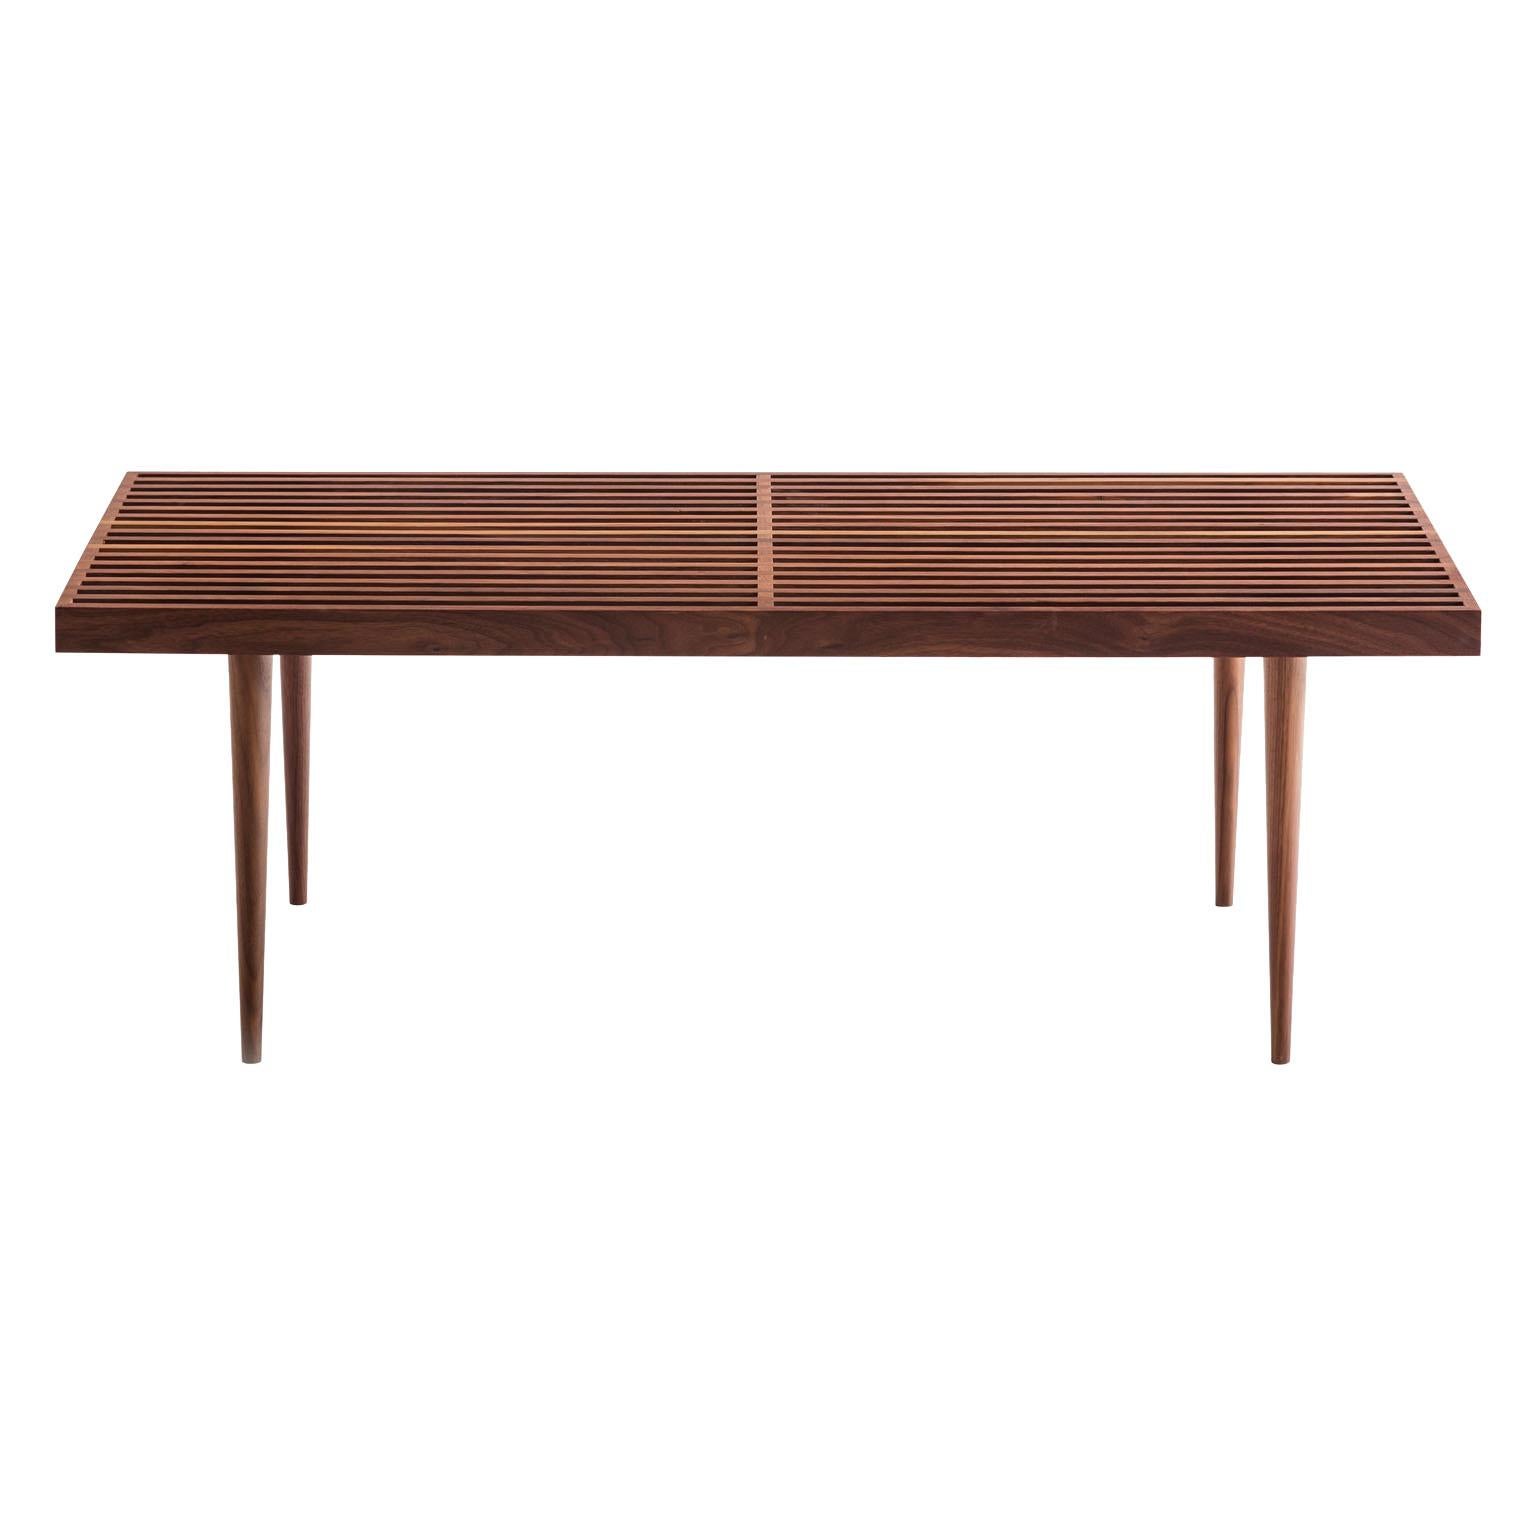 44" Slatted Walnut Bench or Coffee Table by Mel Smilow